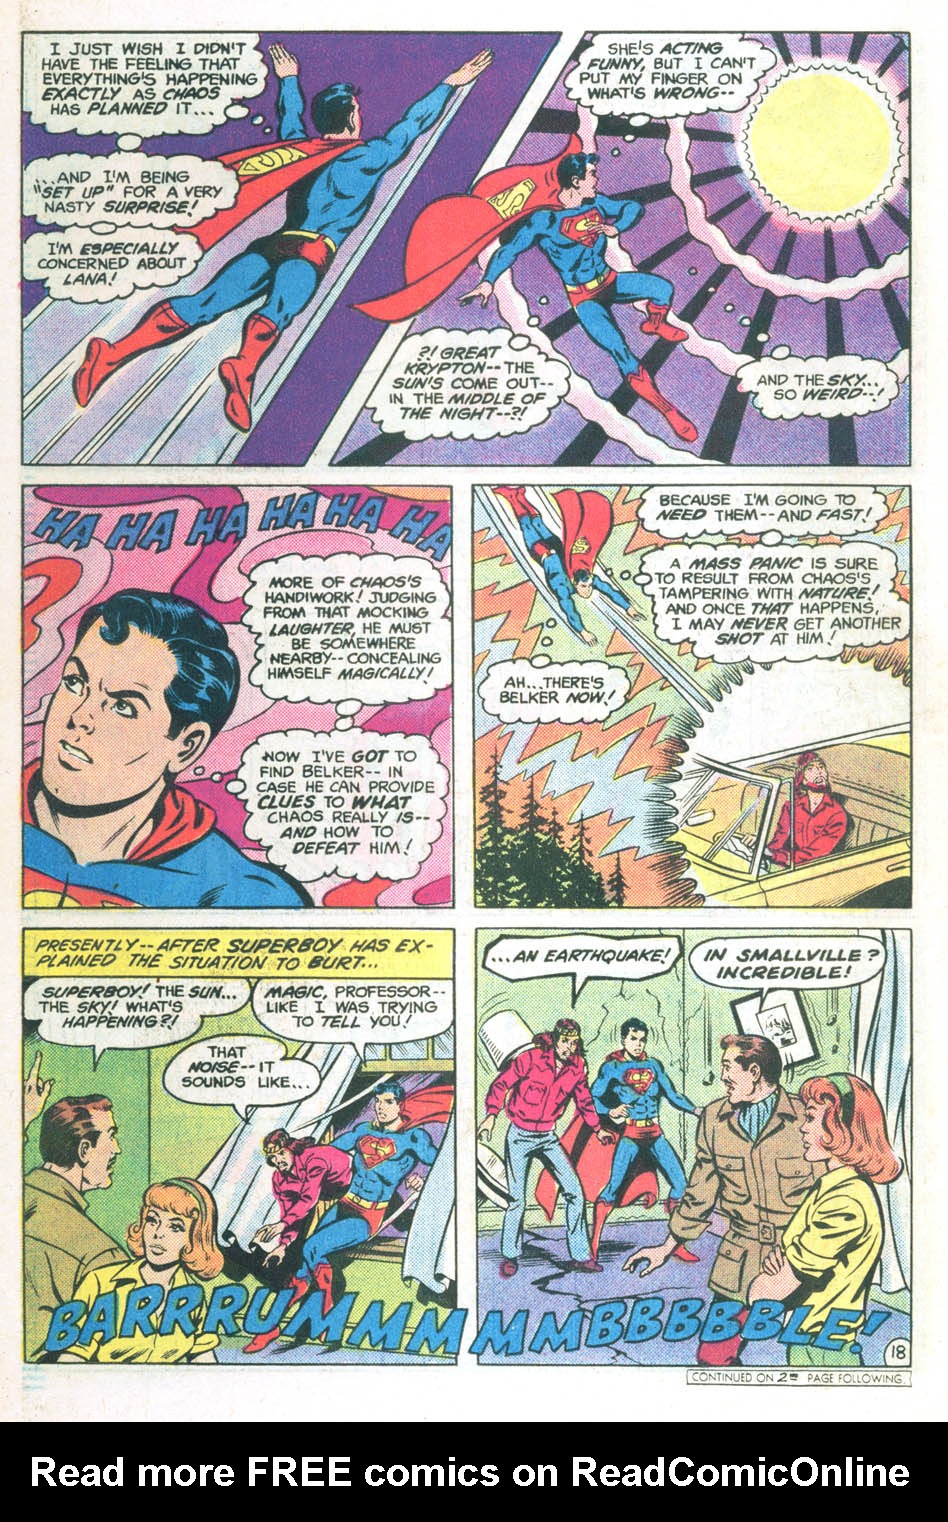 The New Adventures of Superboy 25 Page 18